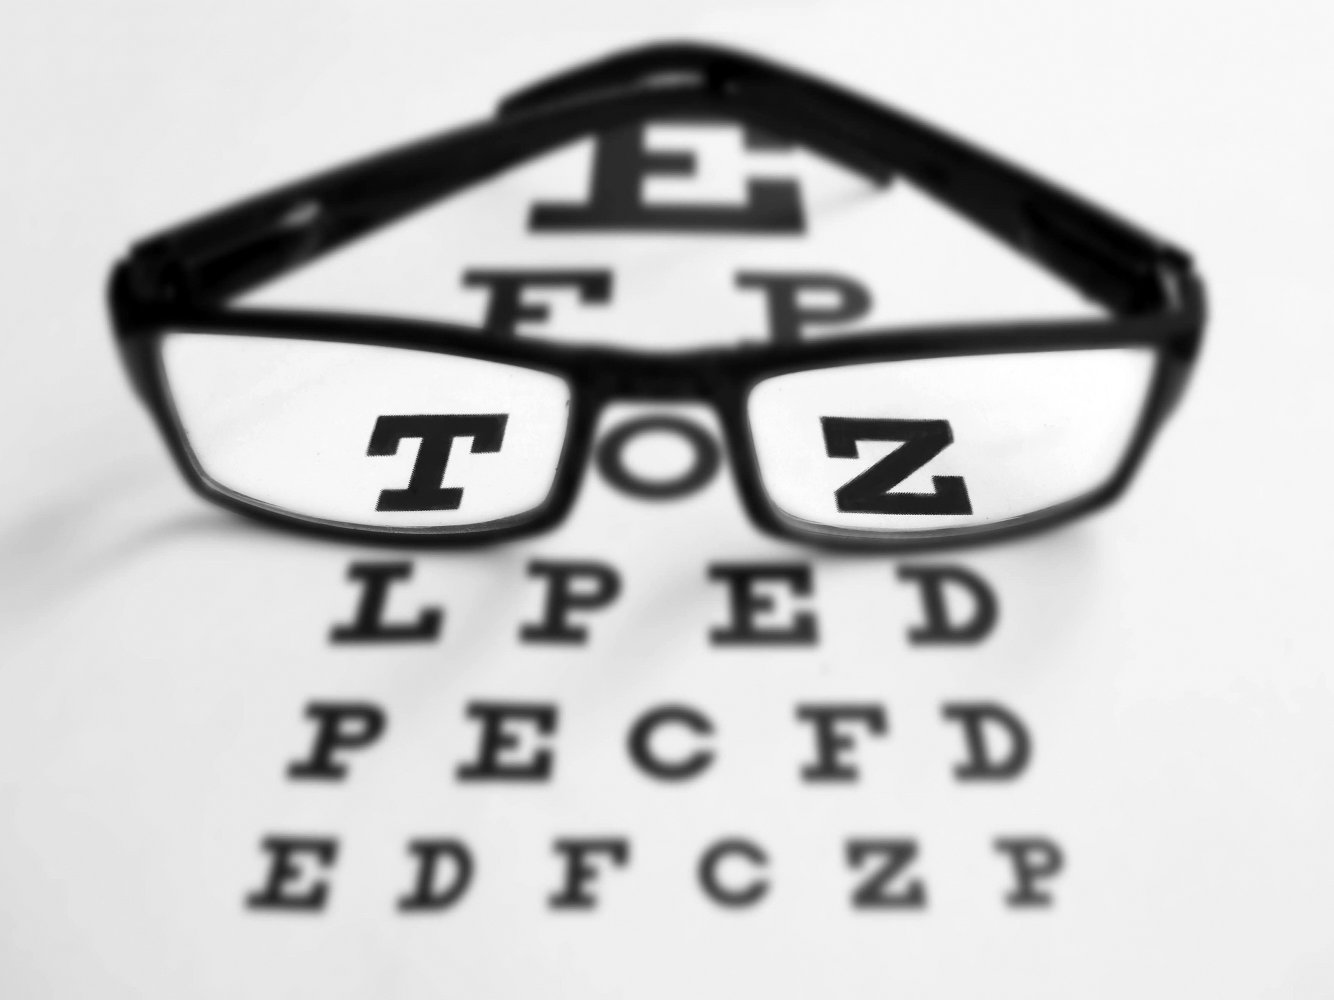 A pair of eyeglasses sitting on top of an eye test chart